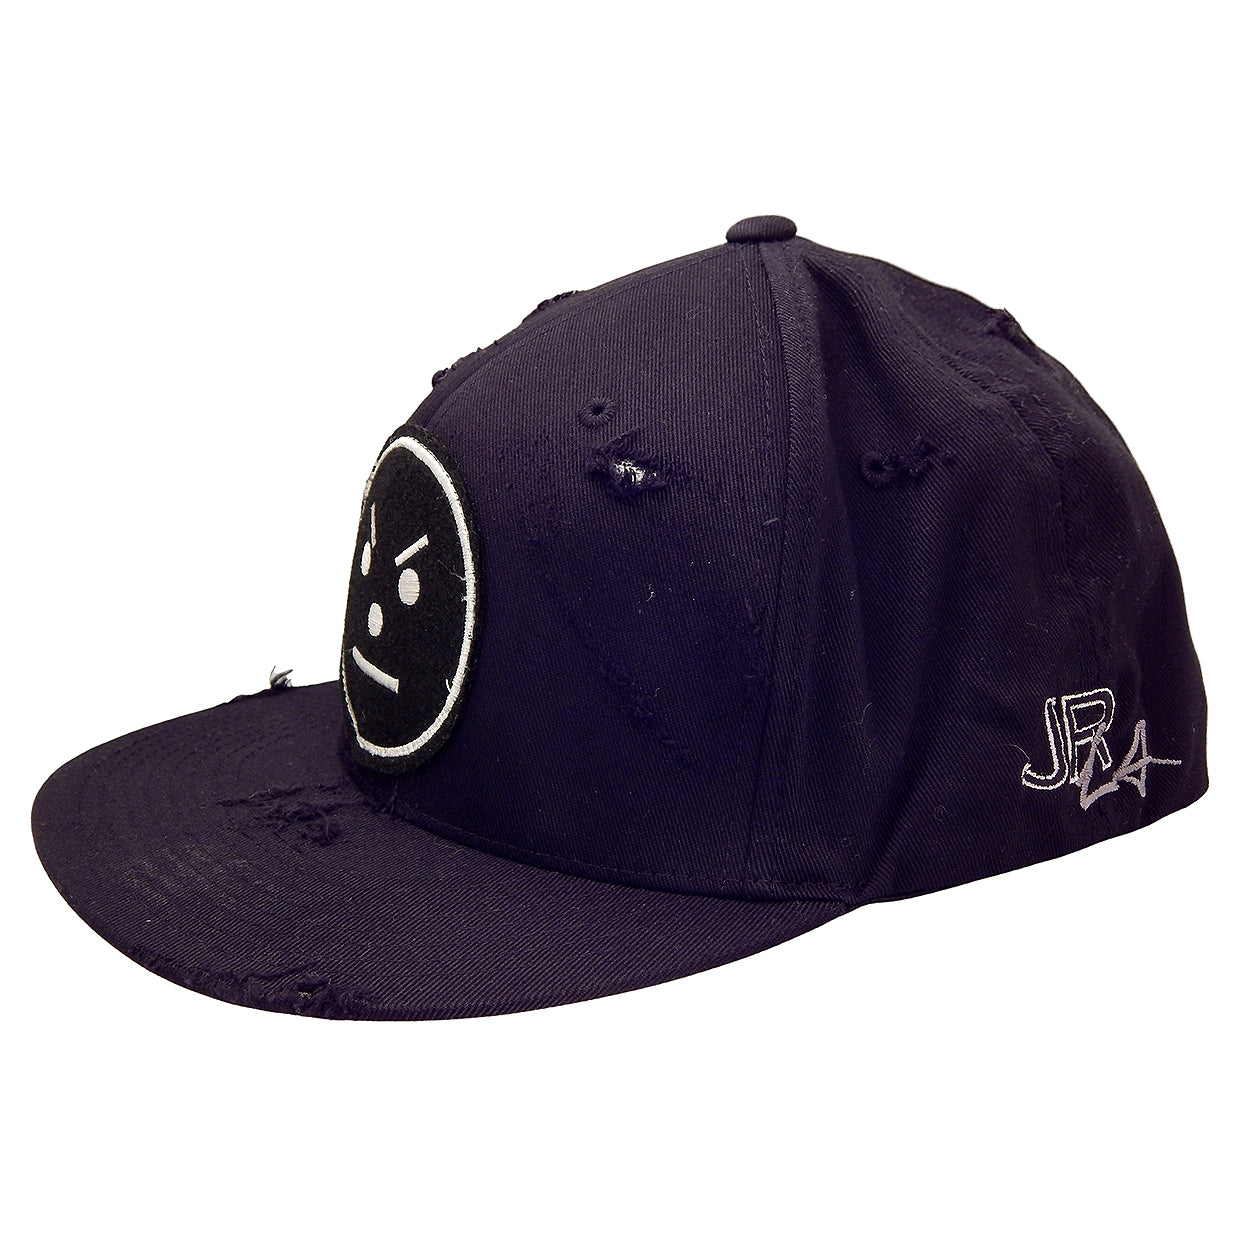 J. Ransom Collection - &quot;SERIOUS SNOWMAN&quot; Flat Billed Hat in Black on Black